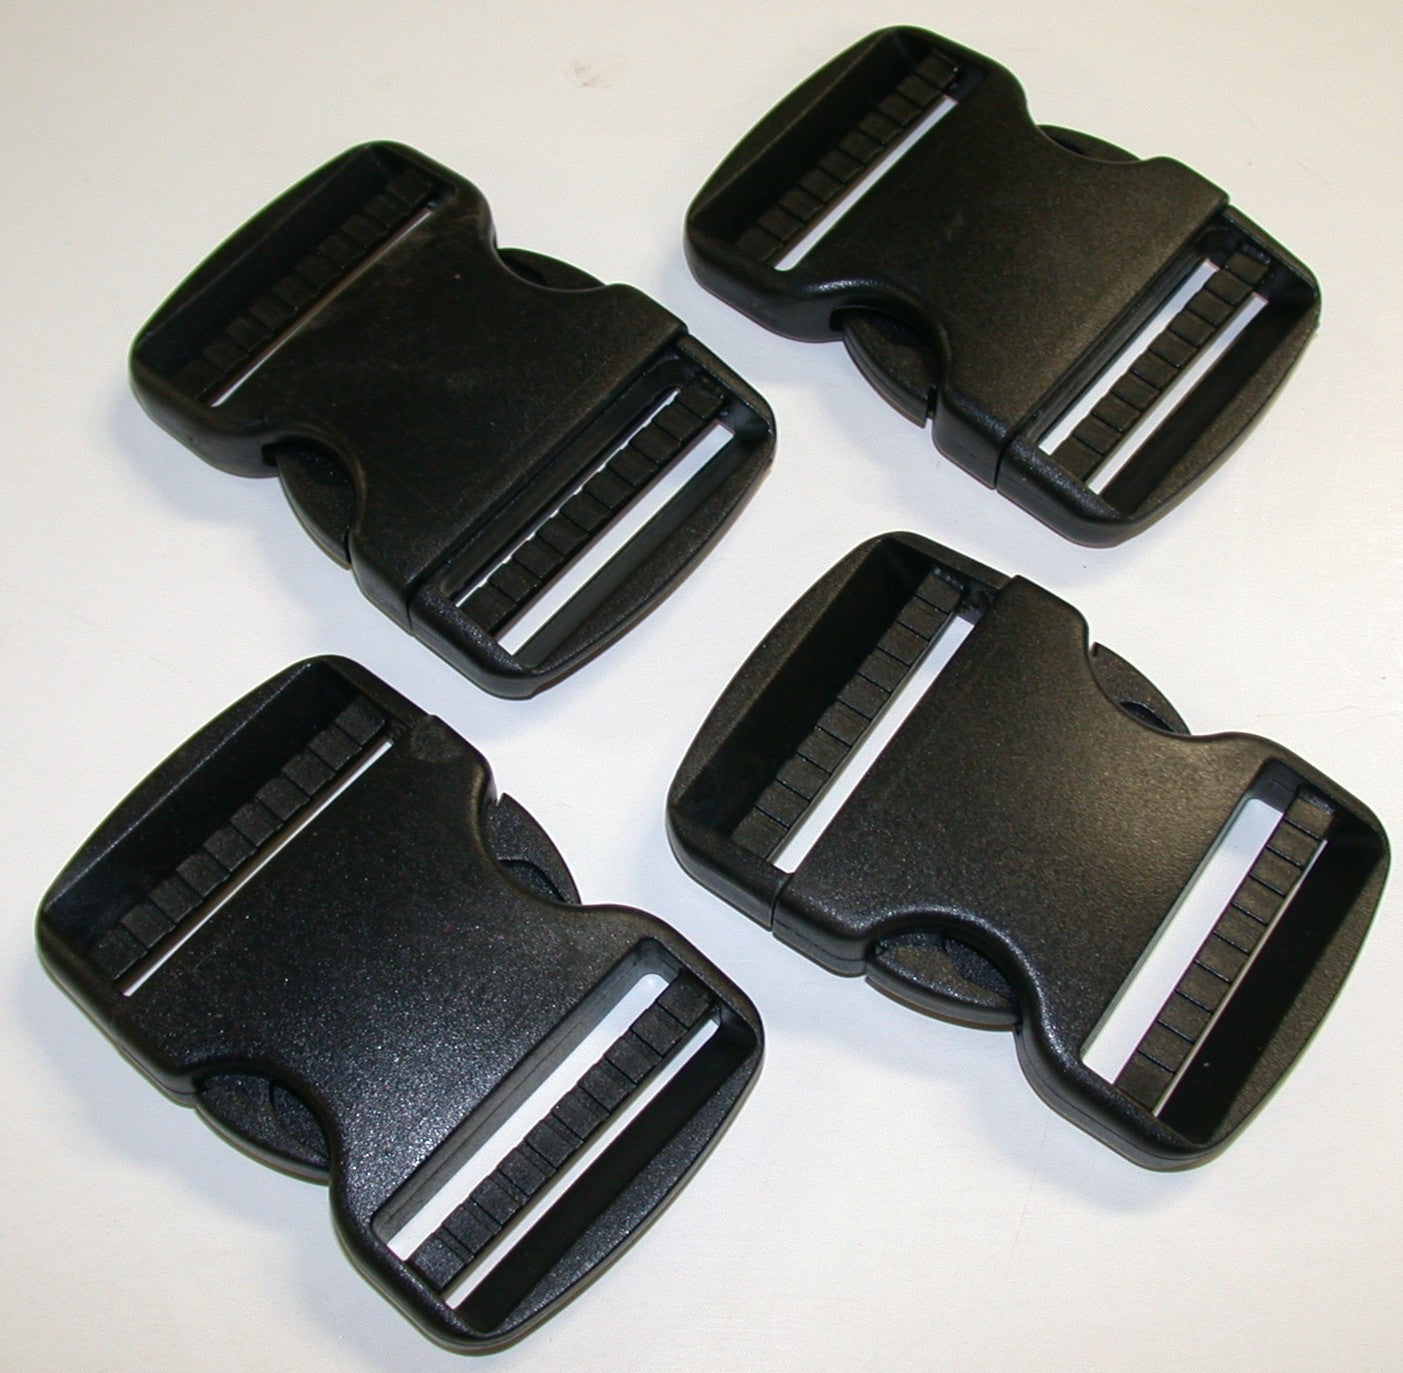 SR2- A set of 4 plastic side release buckles use on 2-inch webbing boundary kits